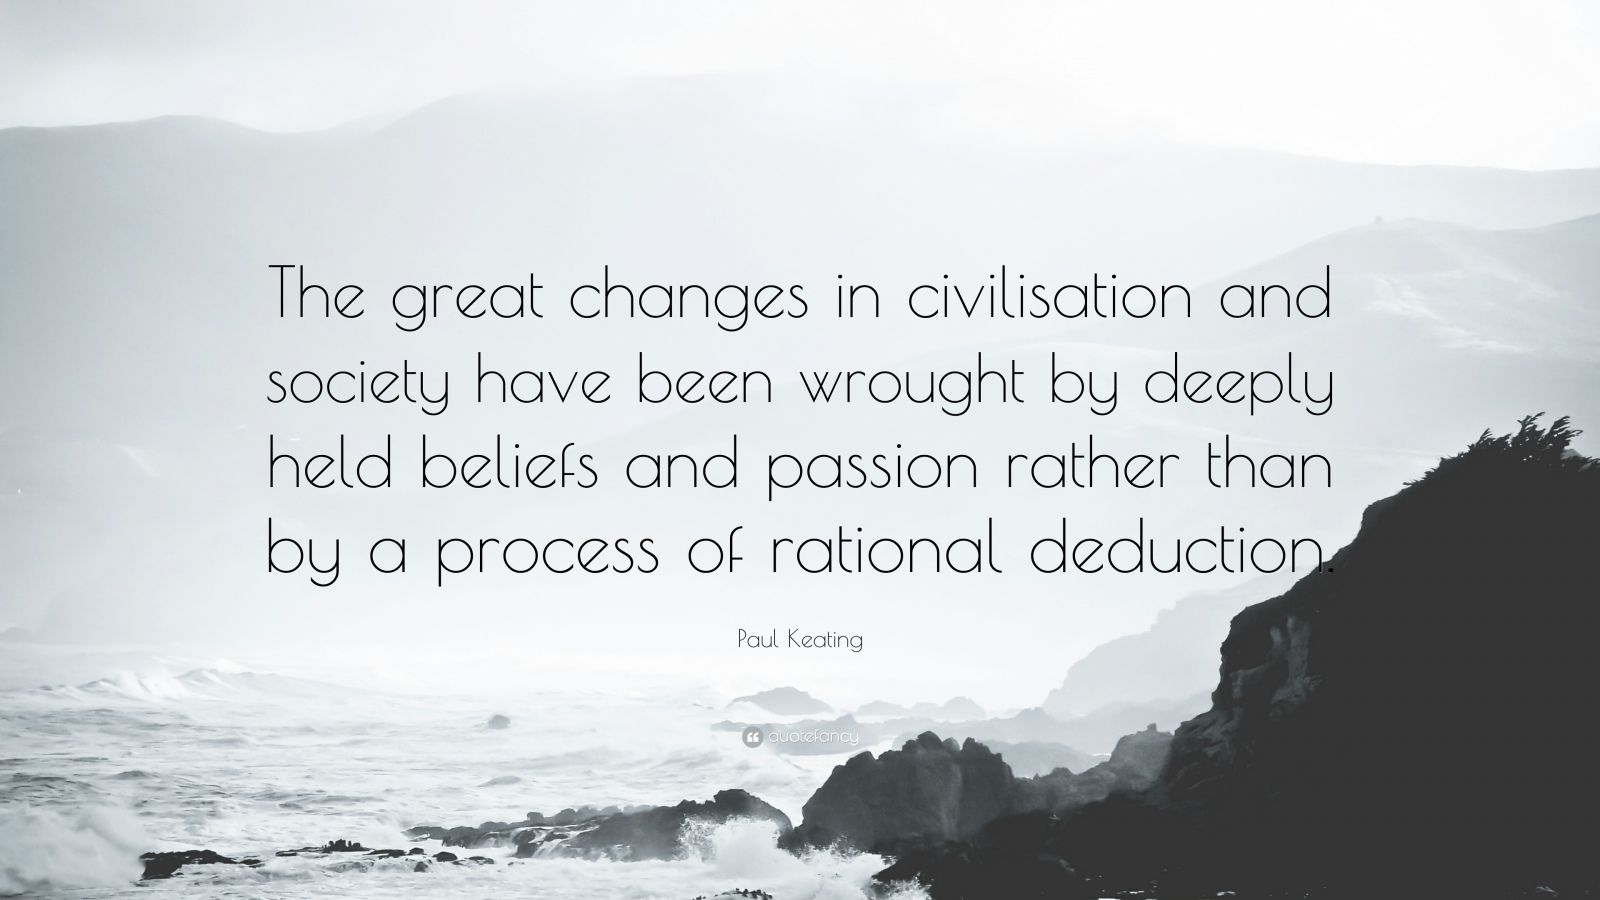 Paul Keating Quote: “The great changes in civilisation and society have ...